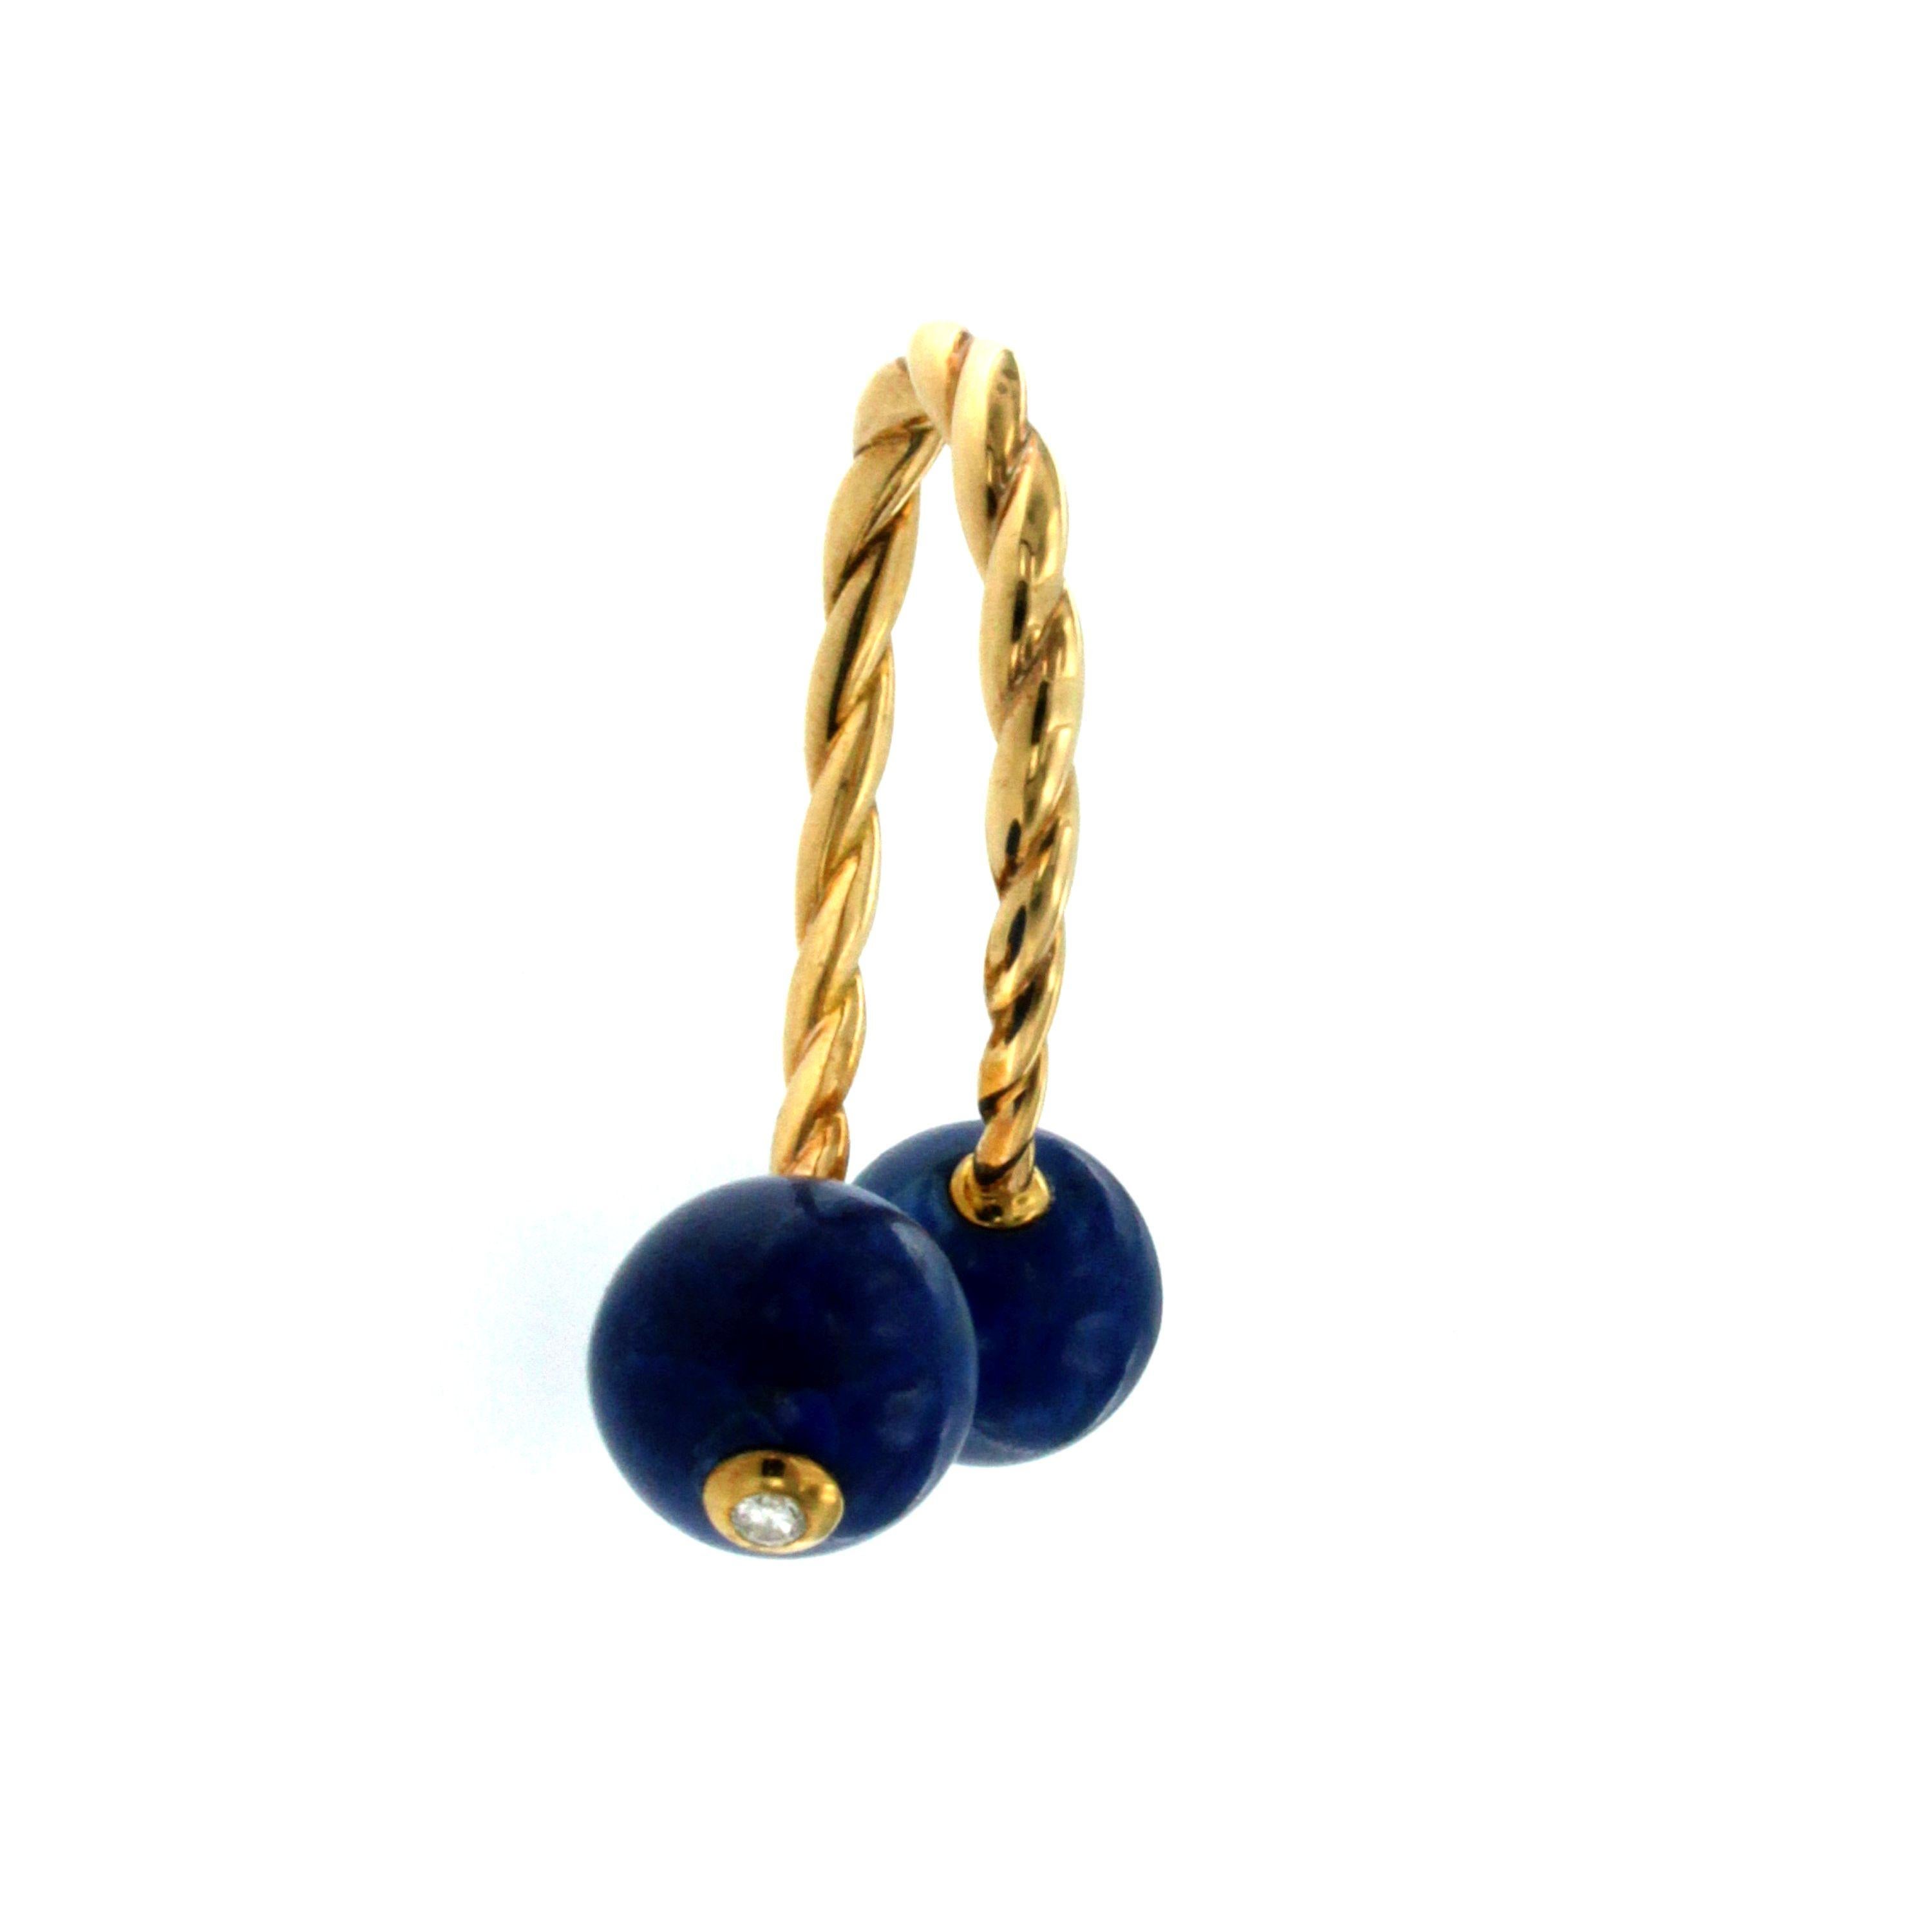 One of a Kind 18k Gold key ring, original from 1970, set with two Lapis Lazuli marbles adorned  by two round European cut Diamonds graded I color VVS, set at the bottom in a gold square.
Unscrewing and screwing the Lapis Lazuli marbles, you can